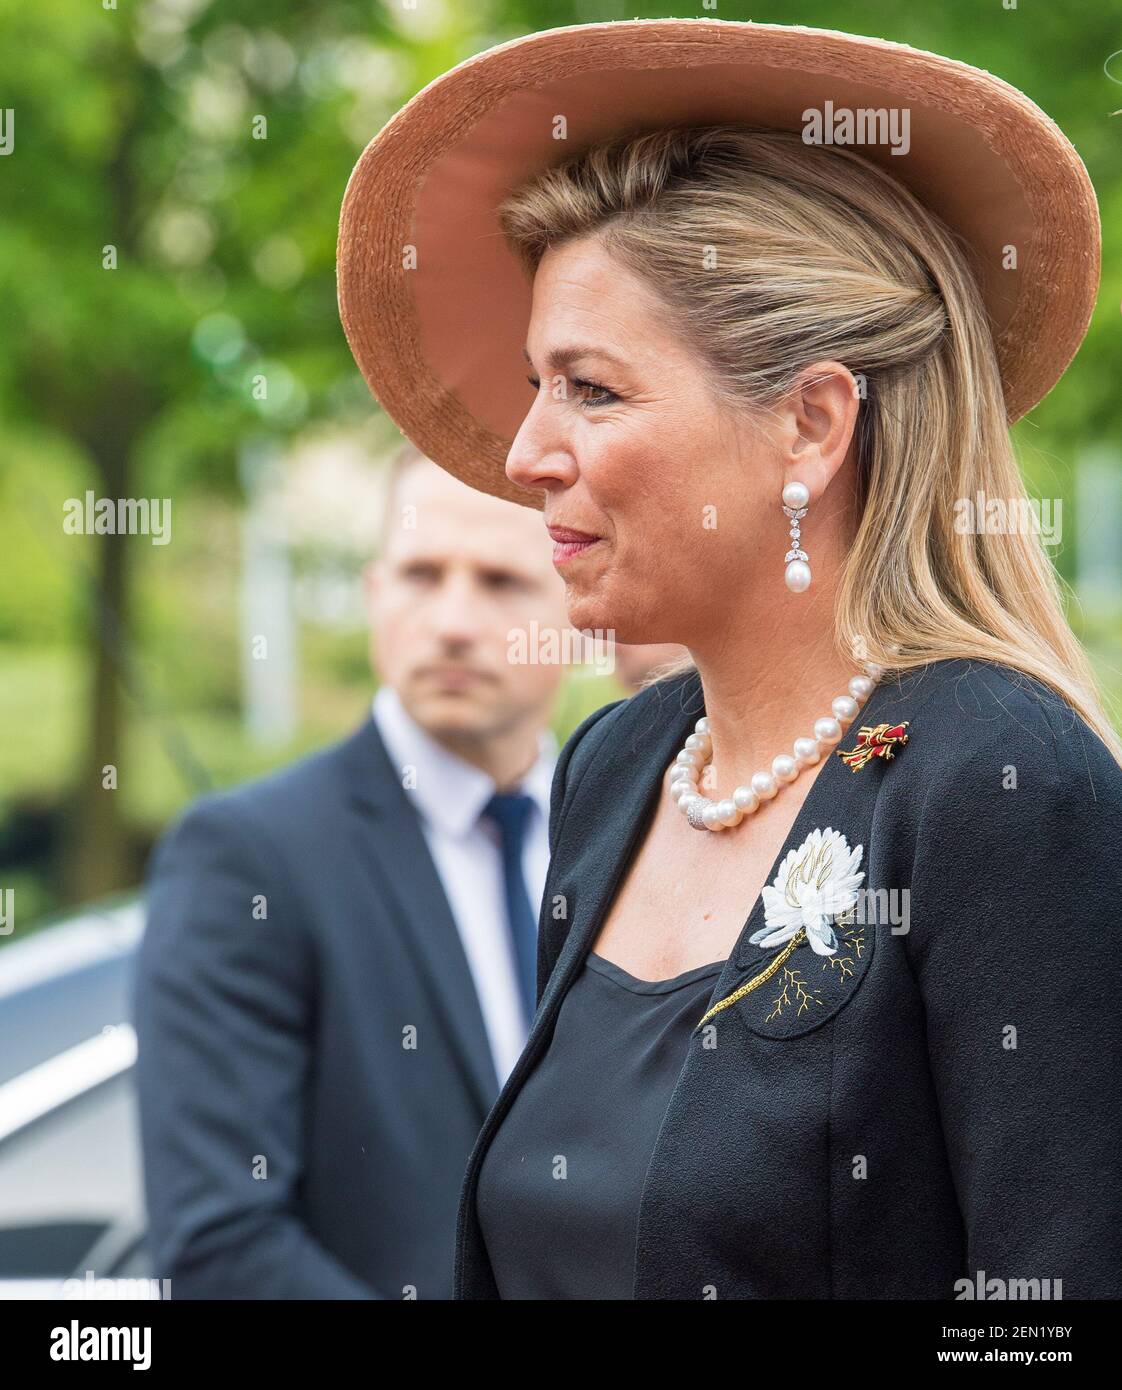 Queen Maxima of the Netherlands during a visit to MV Werften in Rostock, Germany, on the second of 3 day visit to the German States Mecklenburg-Western Pomerania and Brandenburg. (Photo by DPPA/Sipa USA) Stock Photo